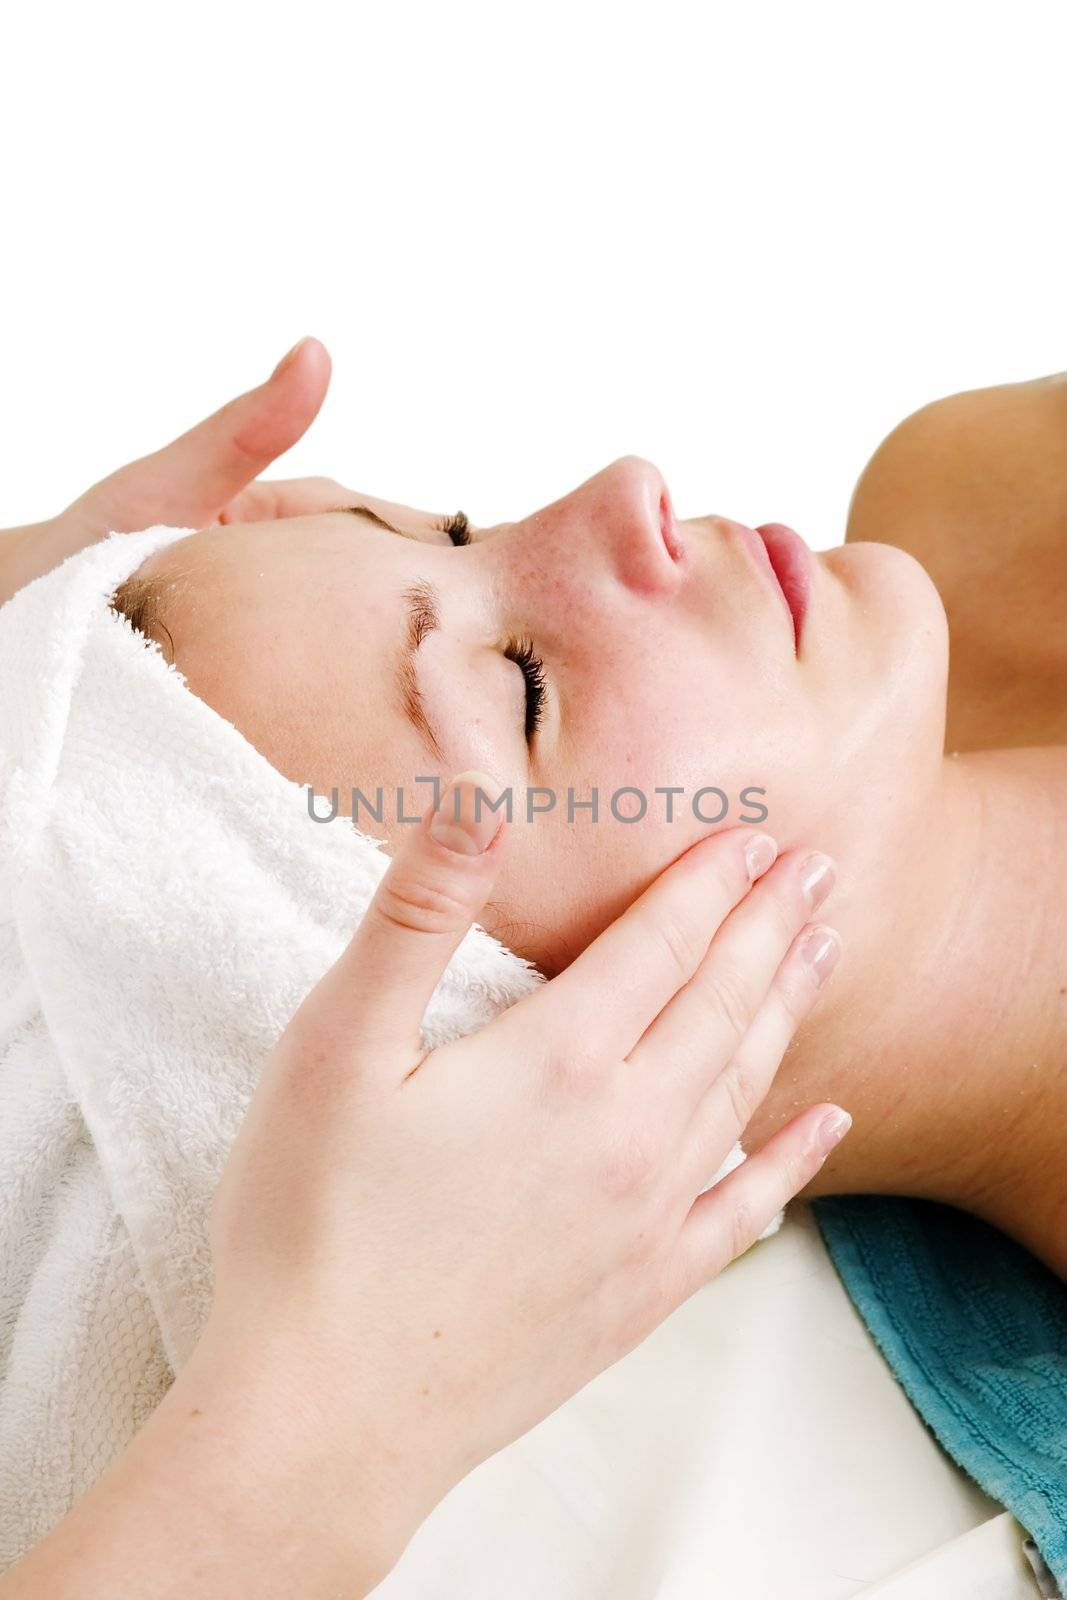 A face massage during a facial at a beauty spa with clipping path.